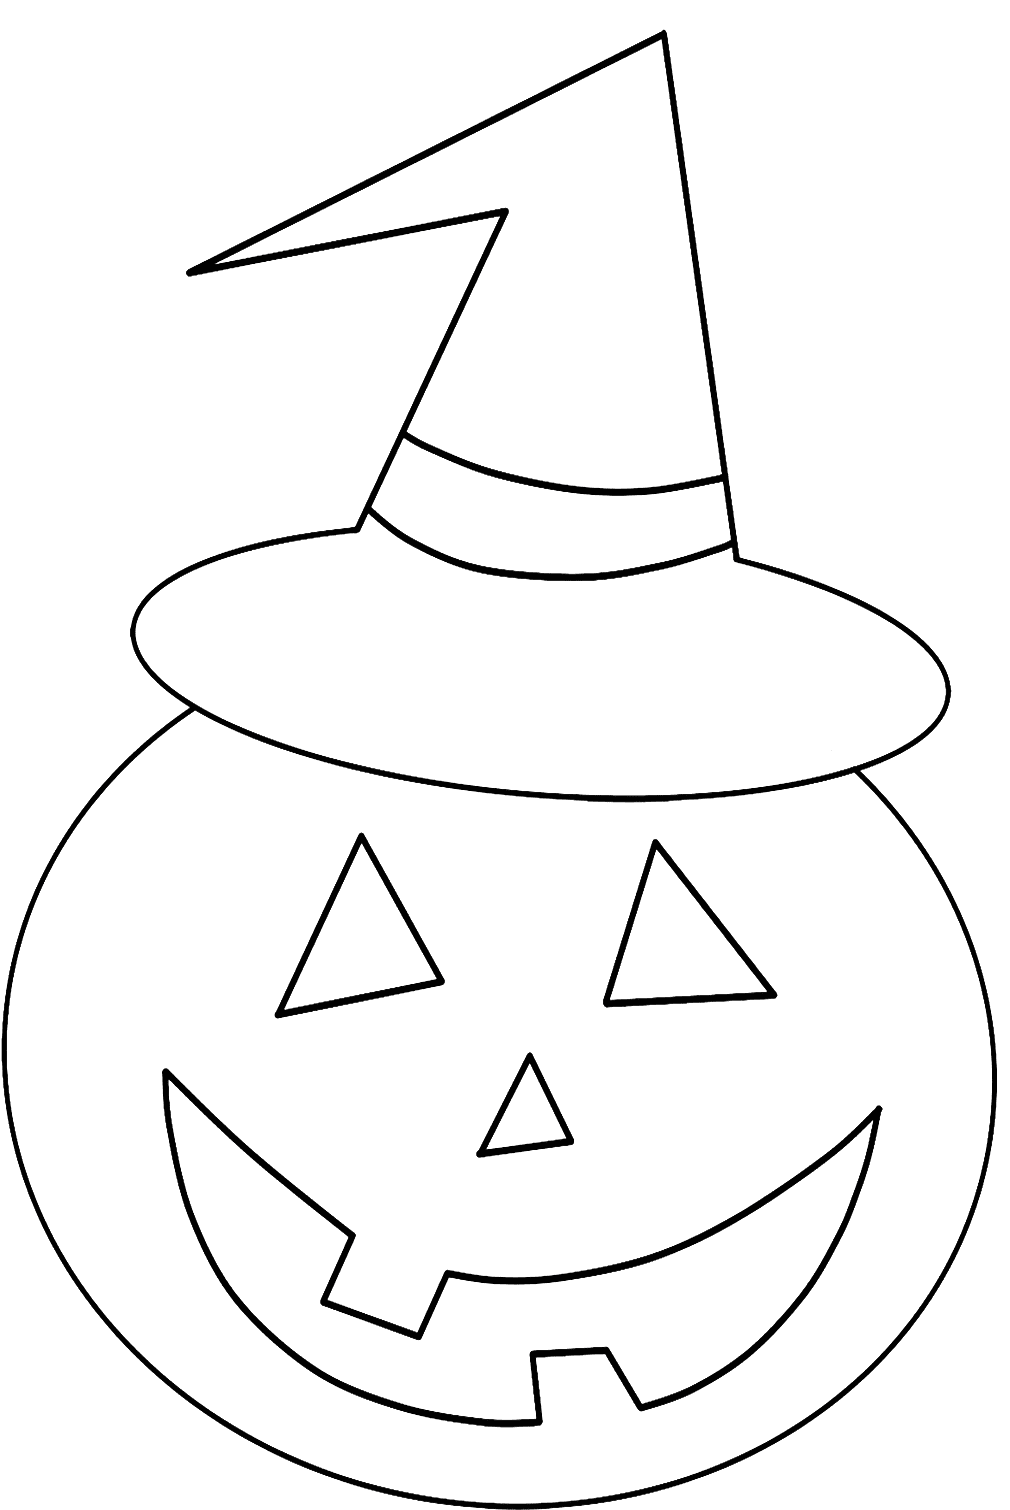 Smiling Pumpkin With Jack O’ Lantern Coloring Pages